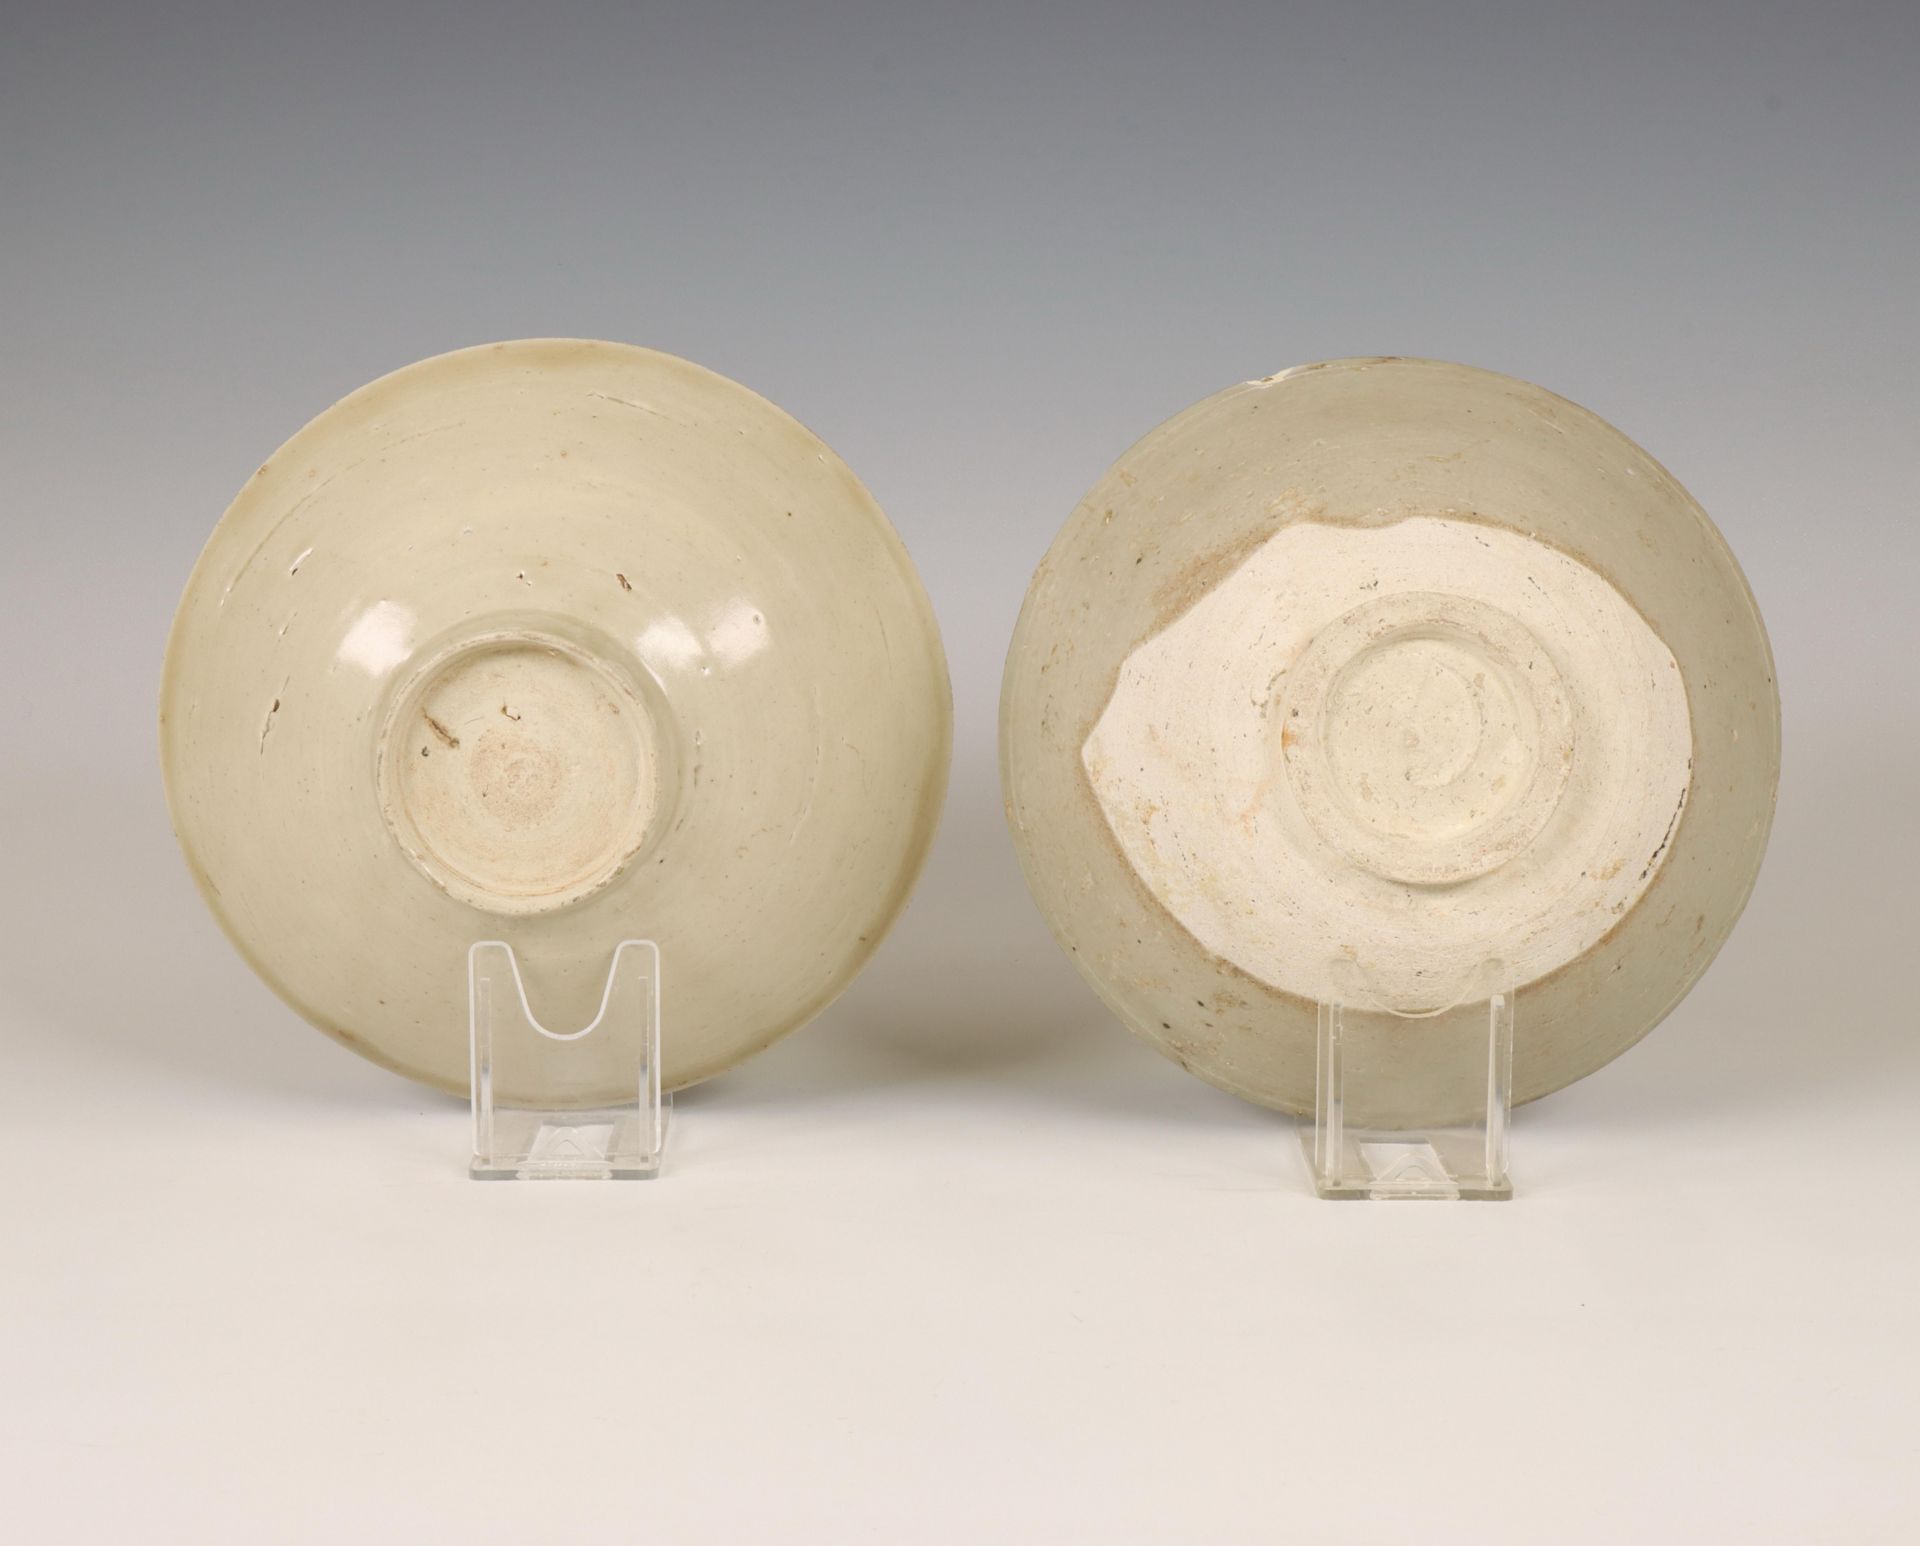 China, two celadon-glazed bowls, Song dynasty (960-1279) or later, - Bild 2 aus 3